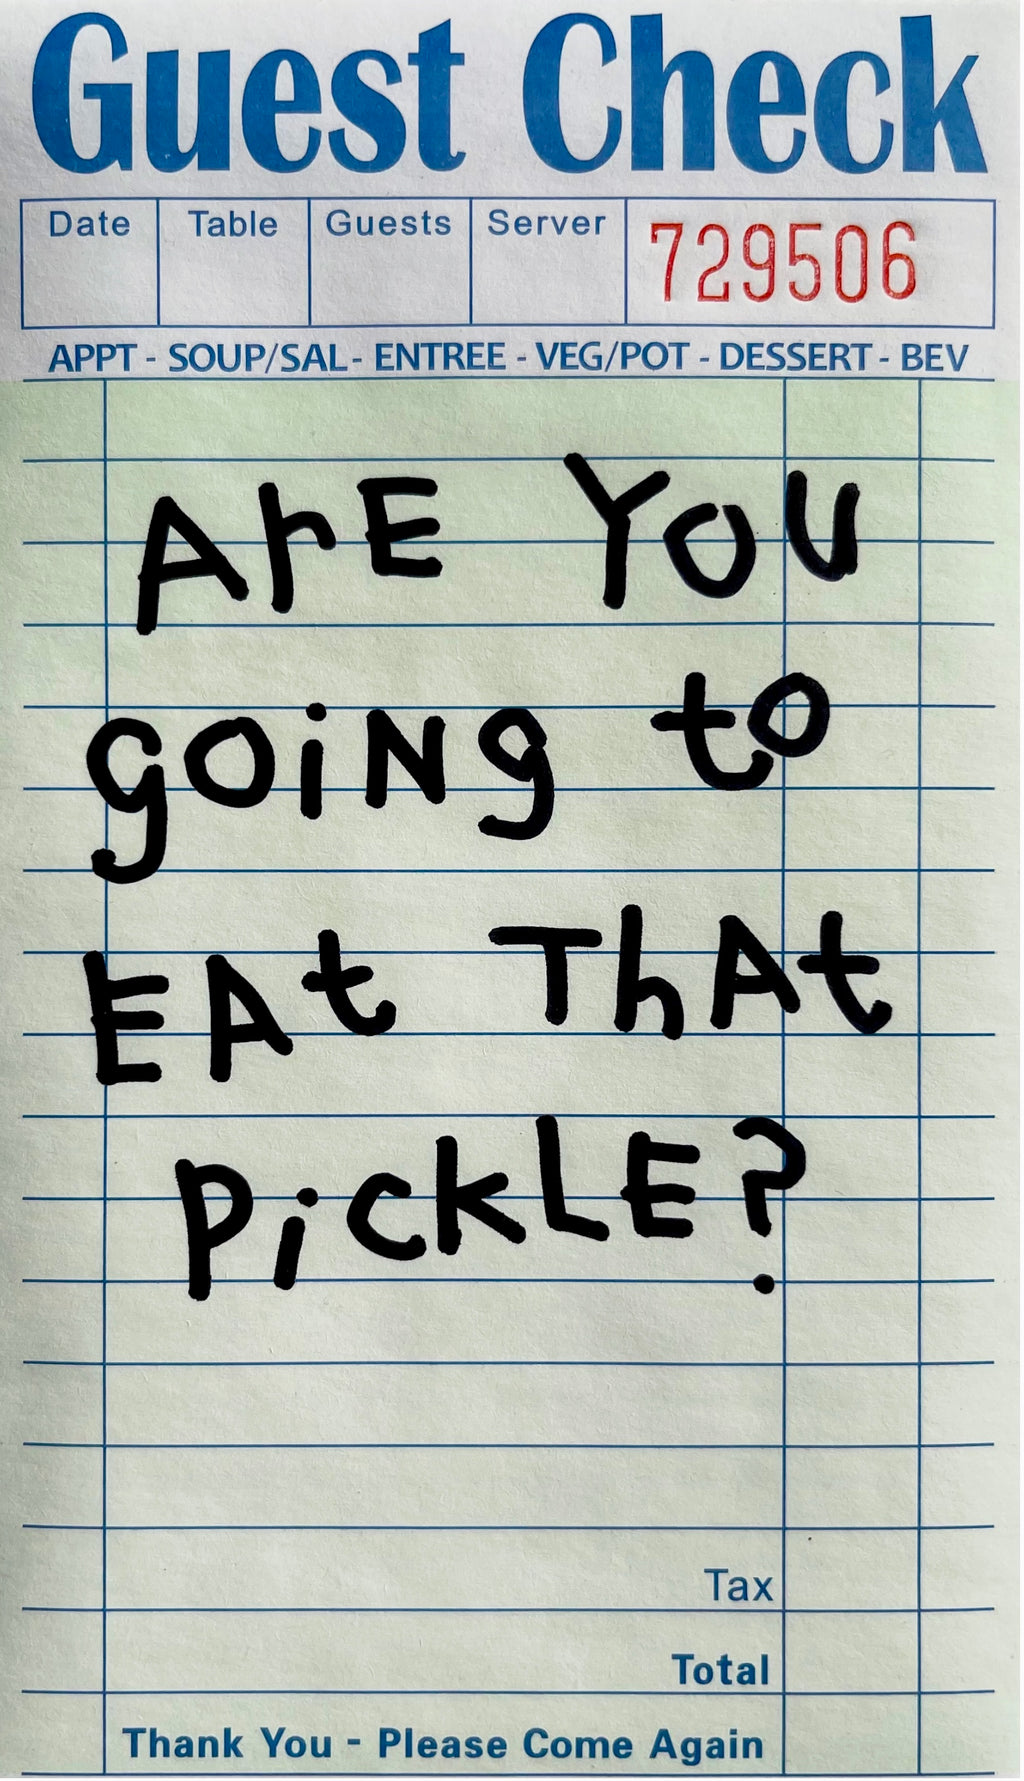 Are You Going to Eat That Pickle? - 12x18in